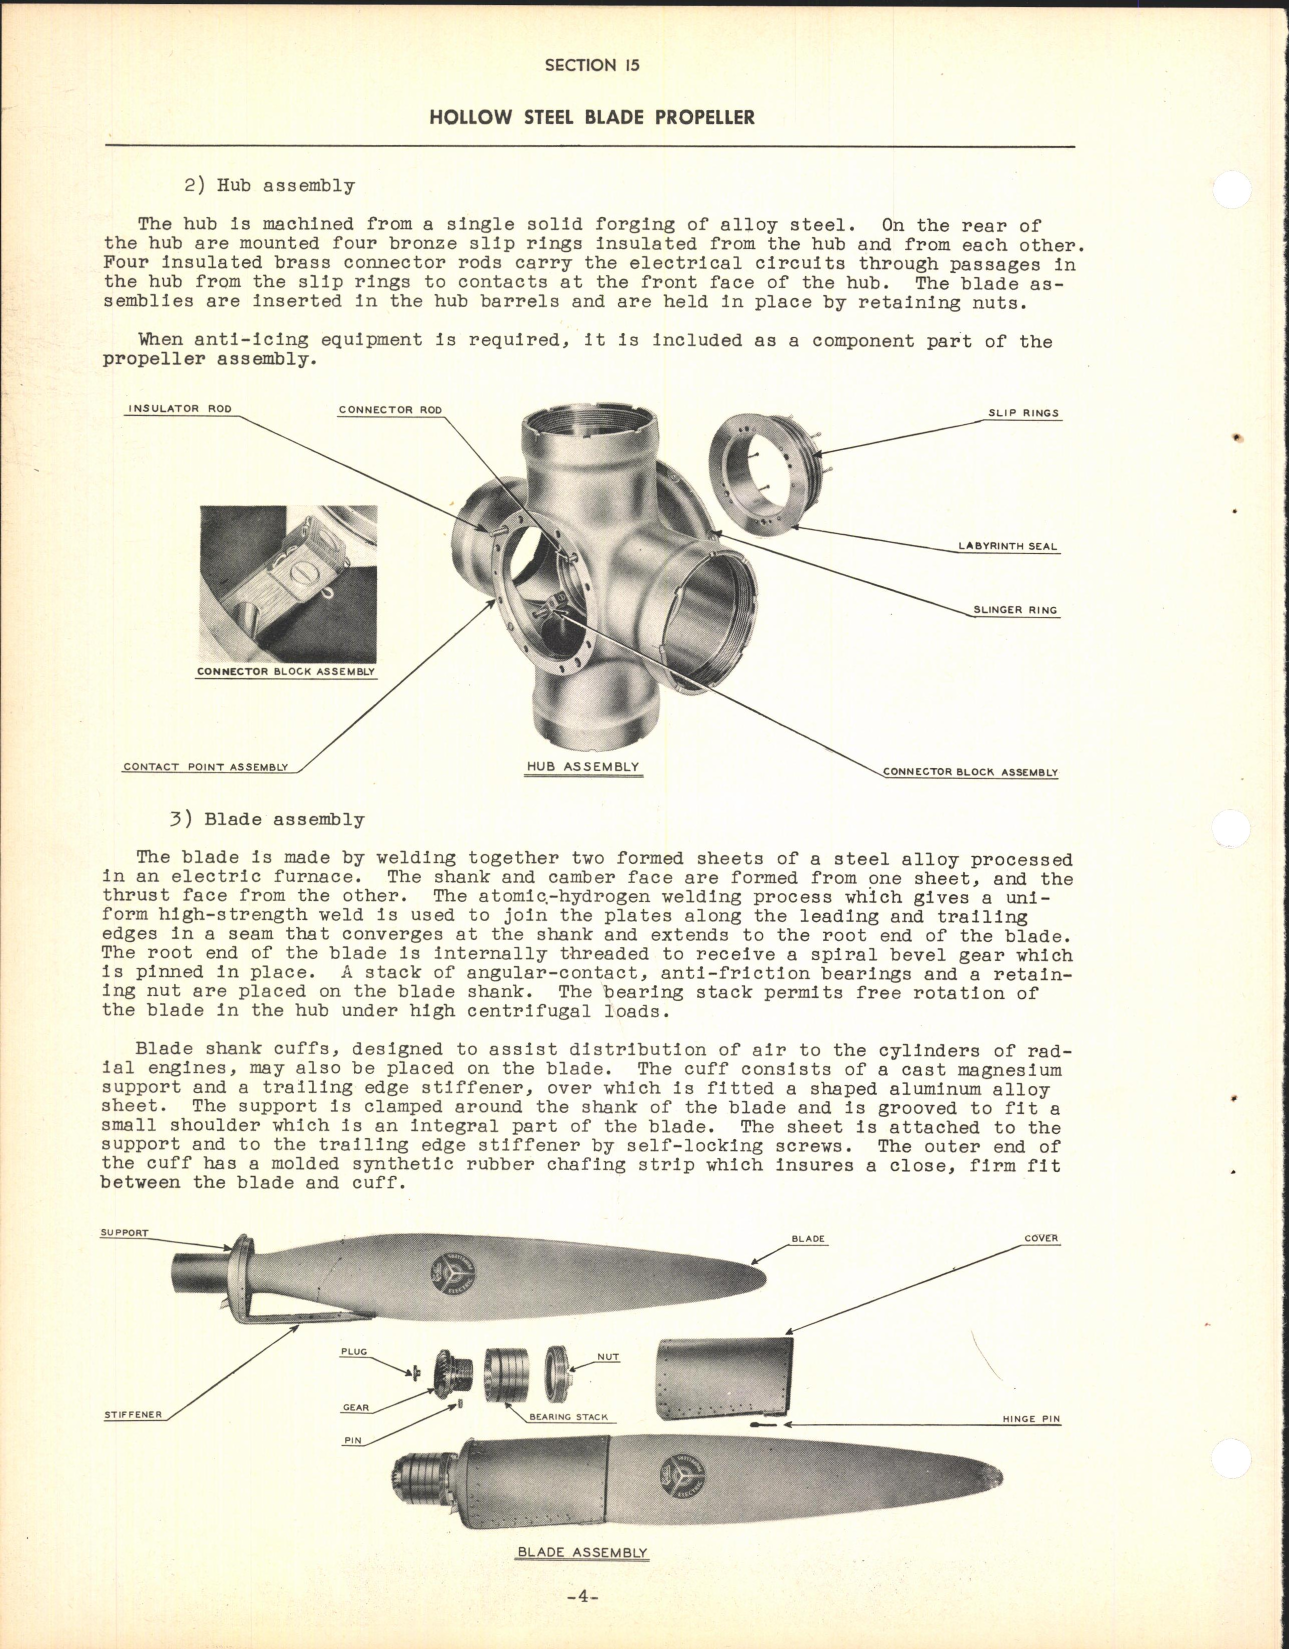 Sample page 6 from AirCorps Library document: Section 15 - Hollow Steel Blade Propeller (Four Blade)